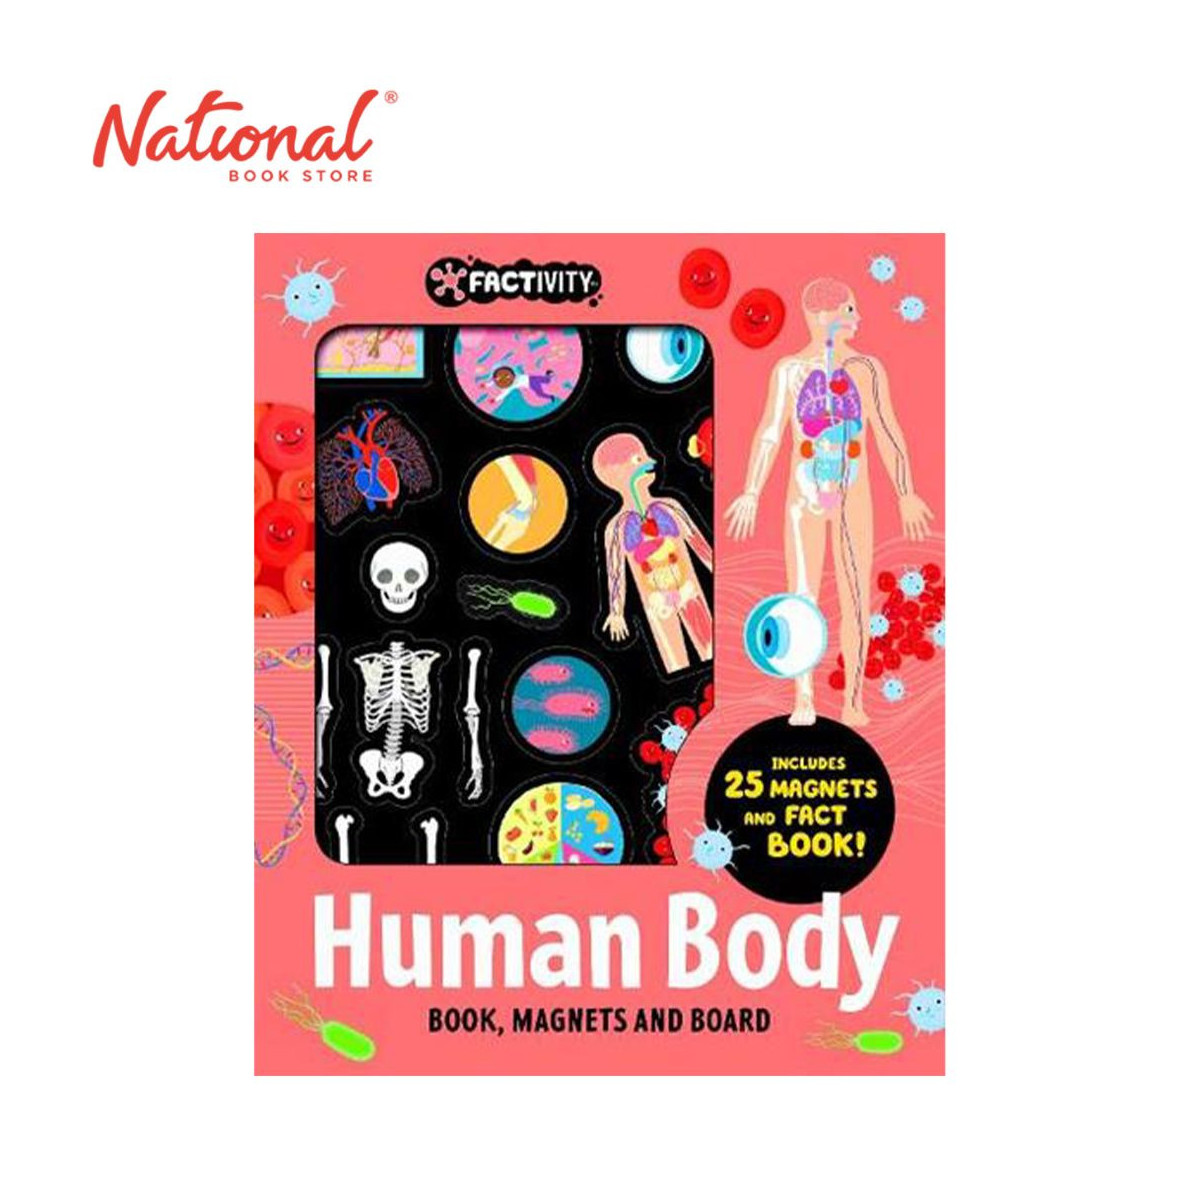 Factivity: Human Body Book, Magnets And Board Neon Ed - Trade Paperback